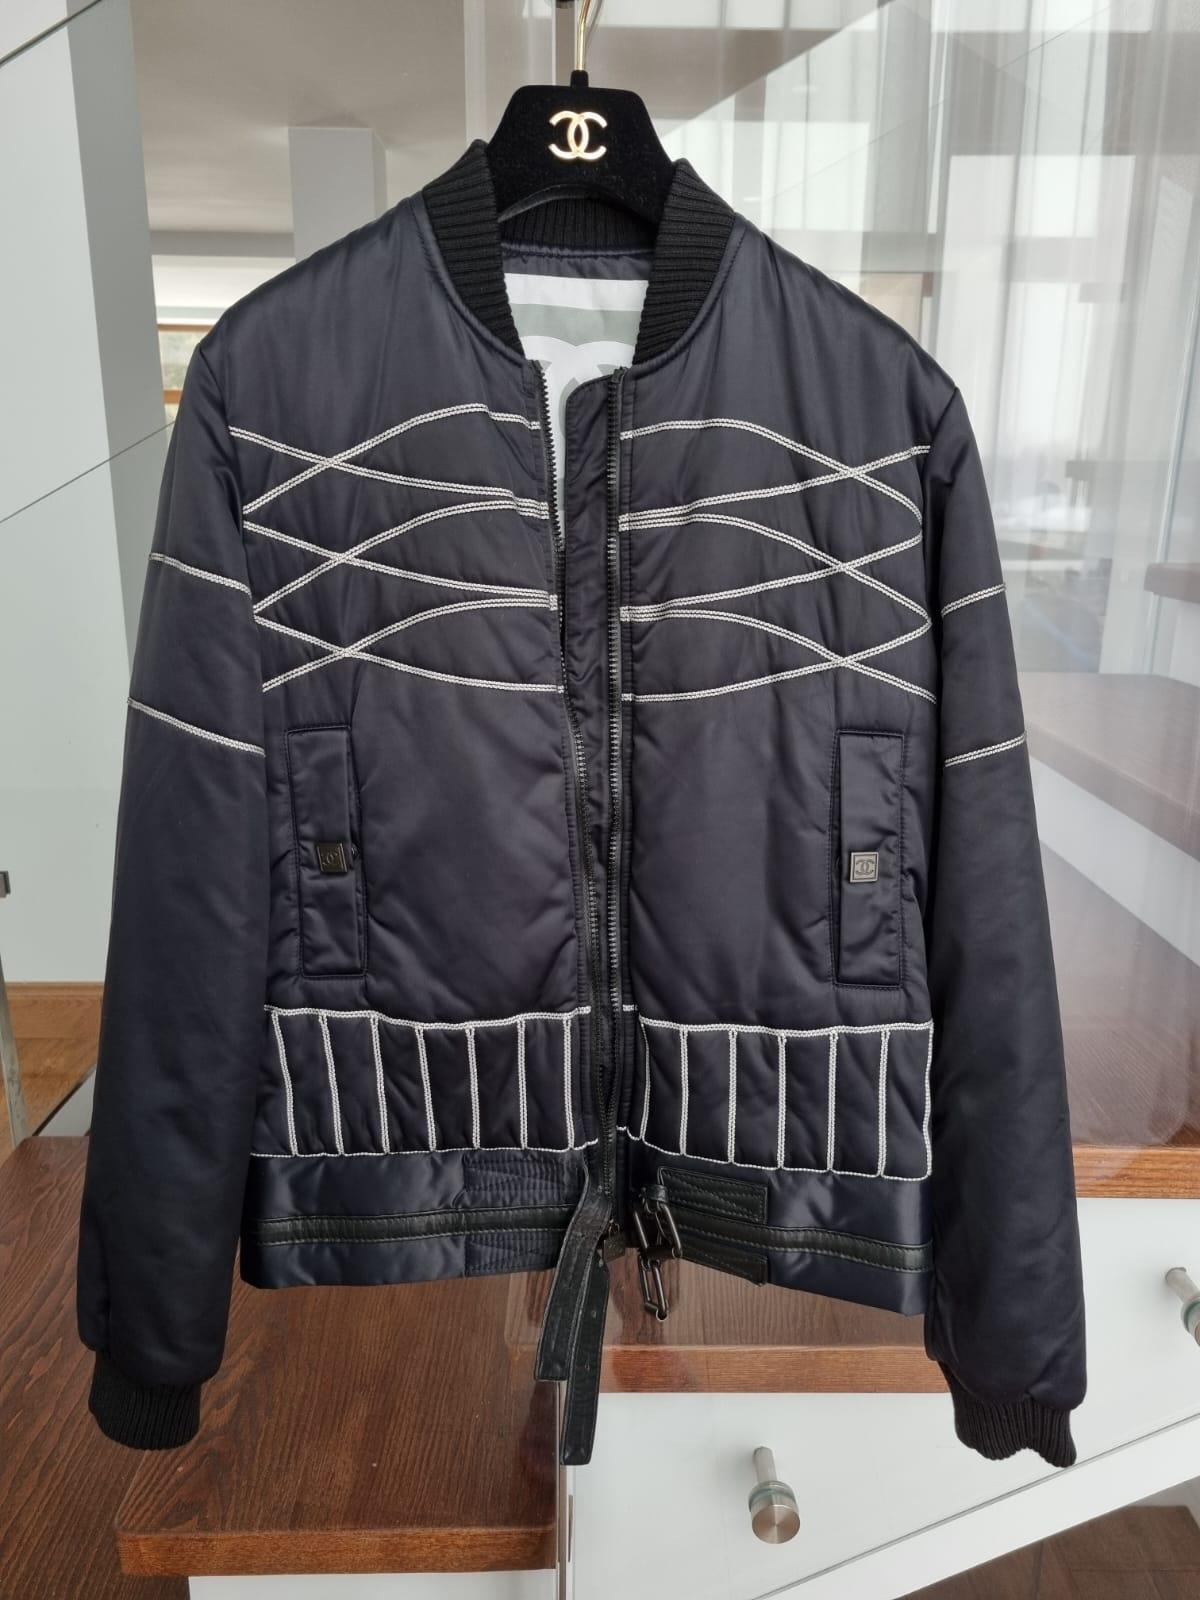 Chanel Jacket size 36. Jacket is in great condition.